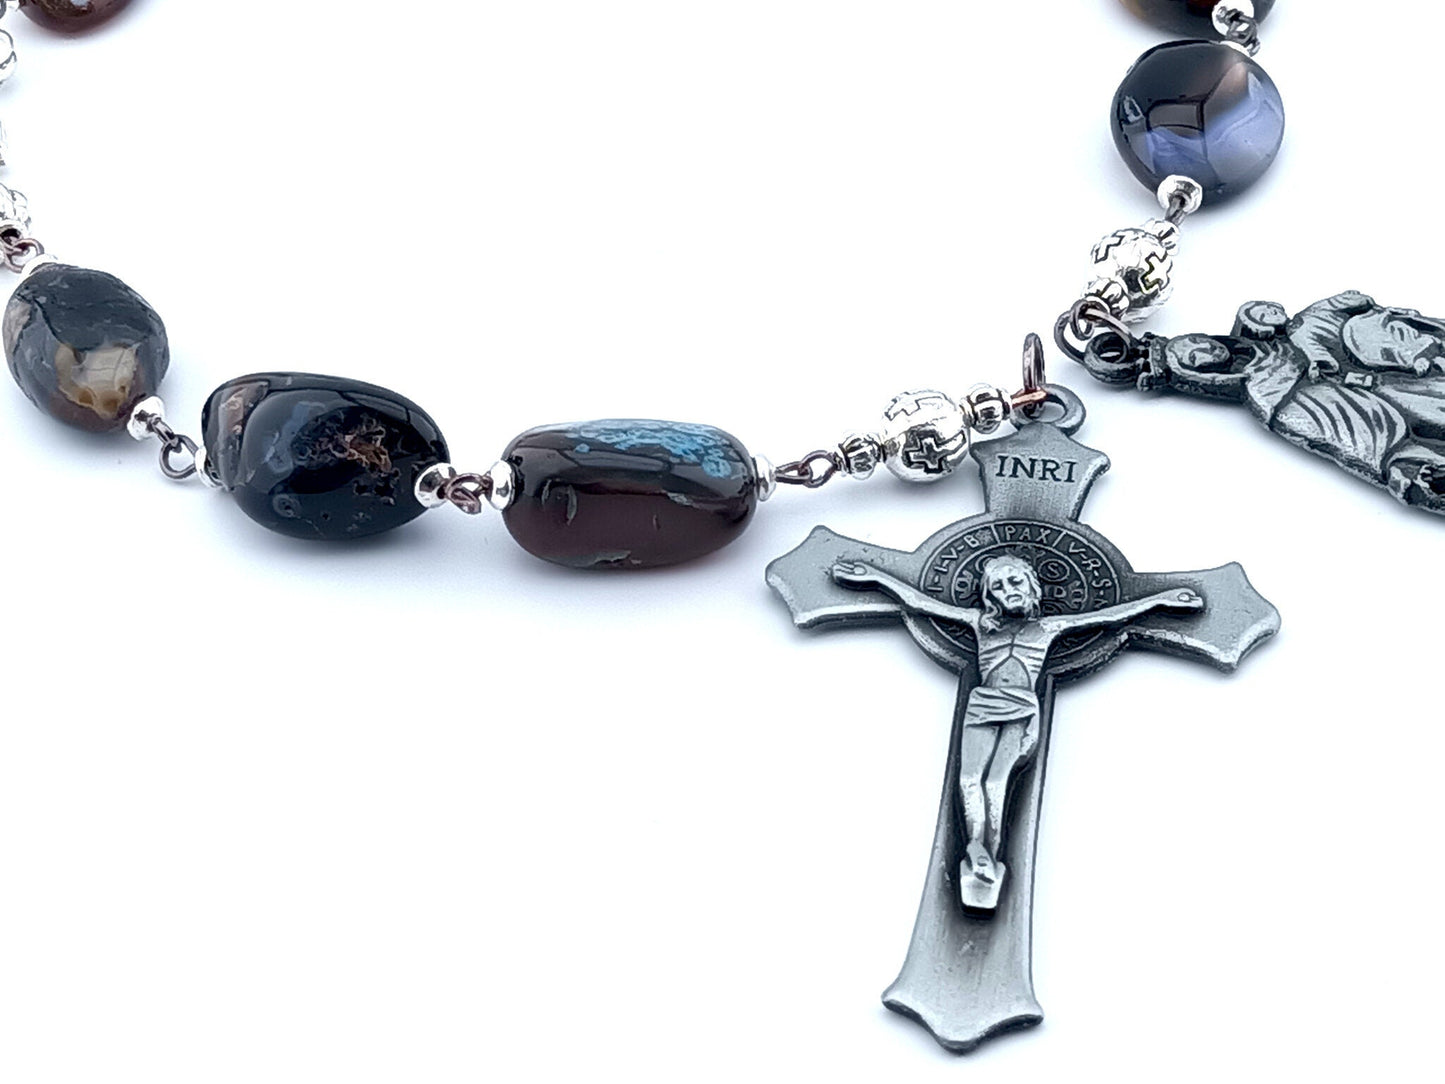 Our Lady of Mount Carmel unique rosary beads prayer chaplet with agate nugget beads, pewter crucifix and Our Lady end medal.